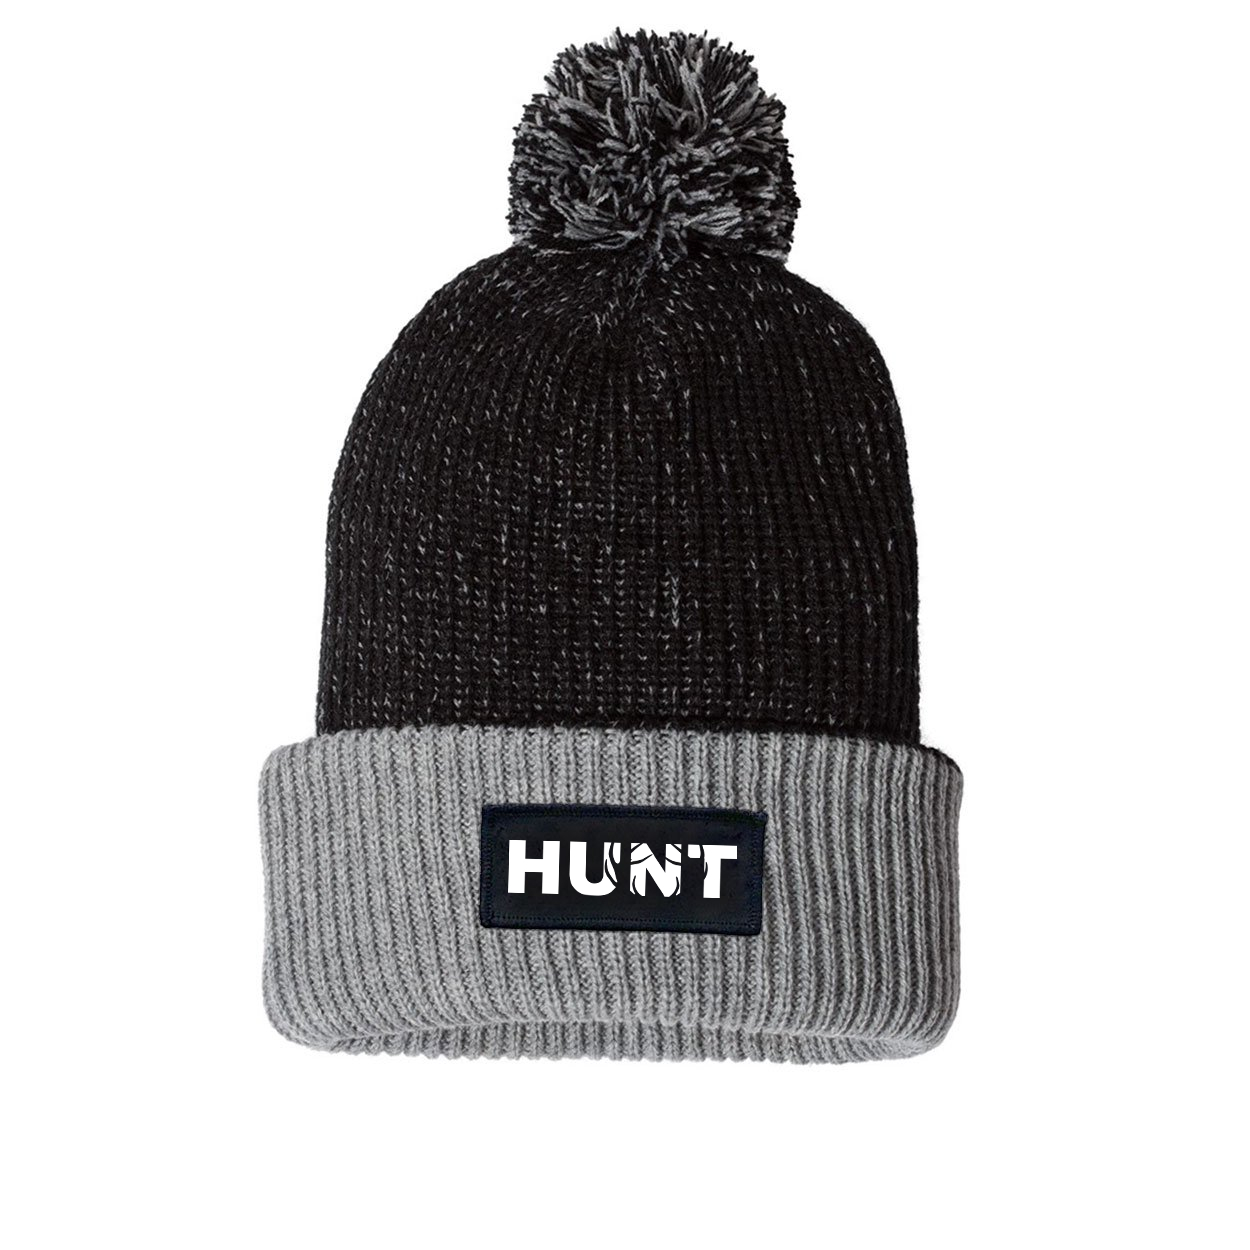 Hunt Rack Logo Night Out Woven Patch Roll Up Pom Knit Beanie Black/Gray (White Logo)